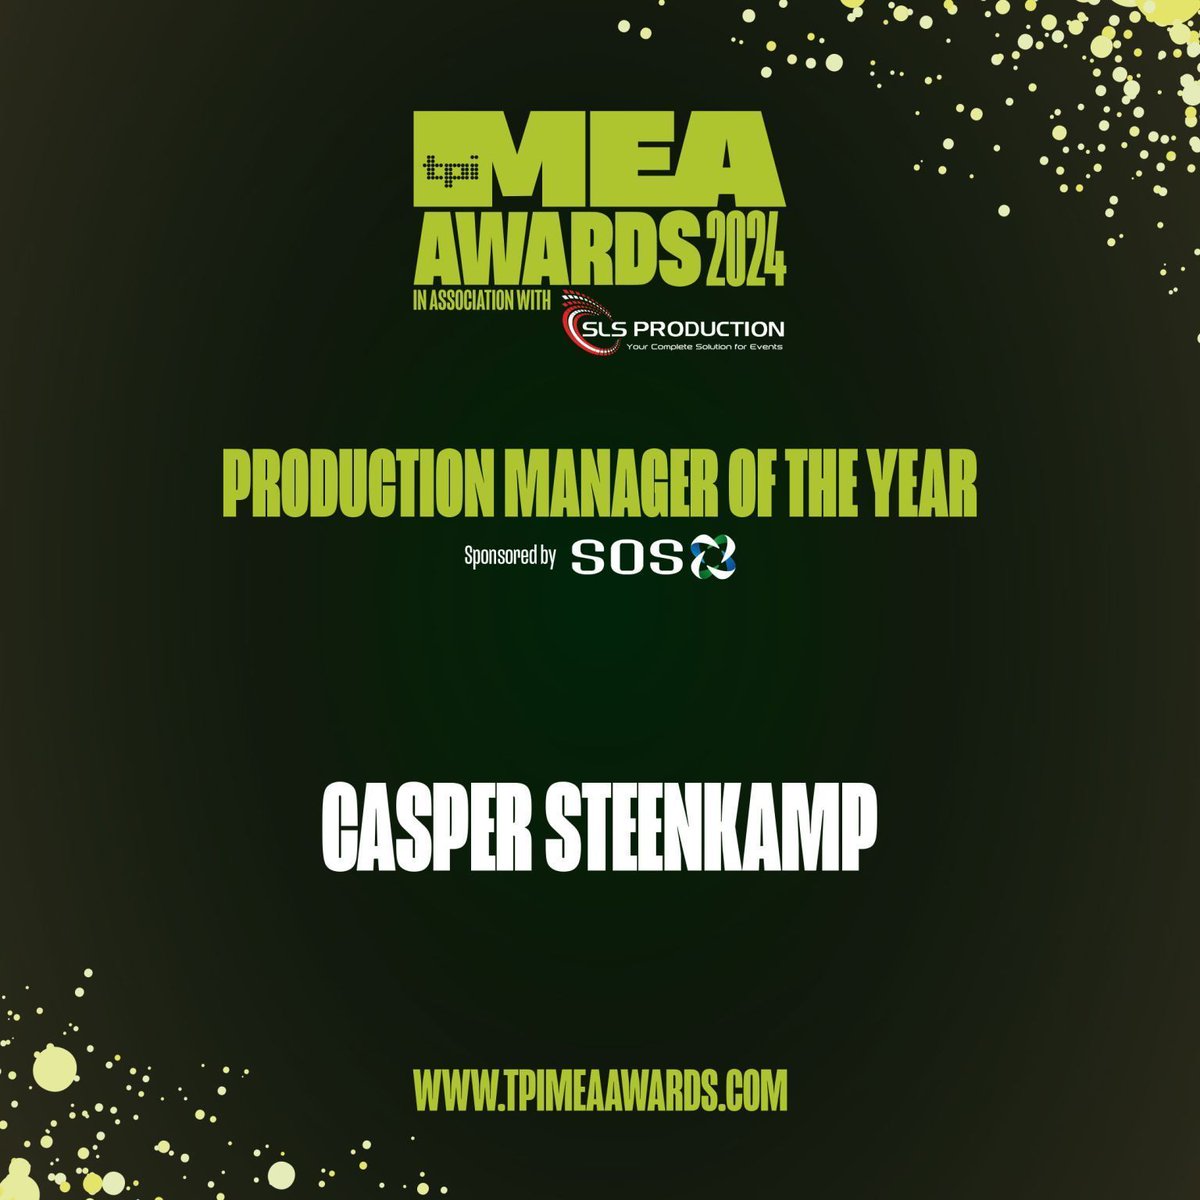 Big congratulations to our very own Casper Steenkamp for winning ‘Production Manager of the Year' at the TPiMEA Awards! Casper’s dedication and expertise sets a high standard in event production and we’re proud to have him on our team! #TPiMEAAwards #TeamSolas #EventExcellence